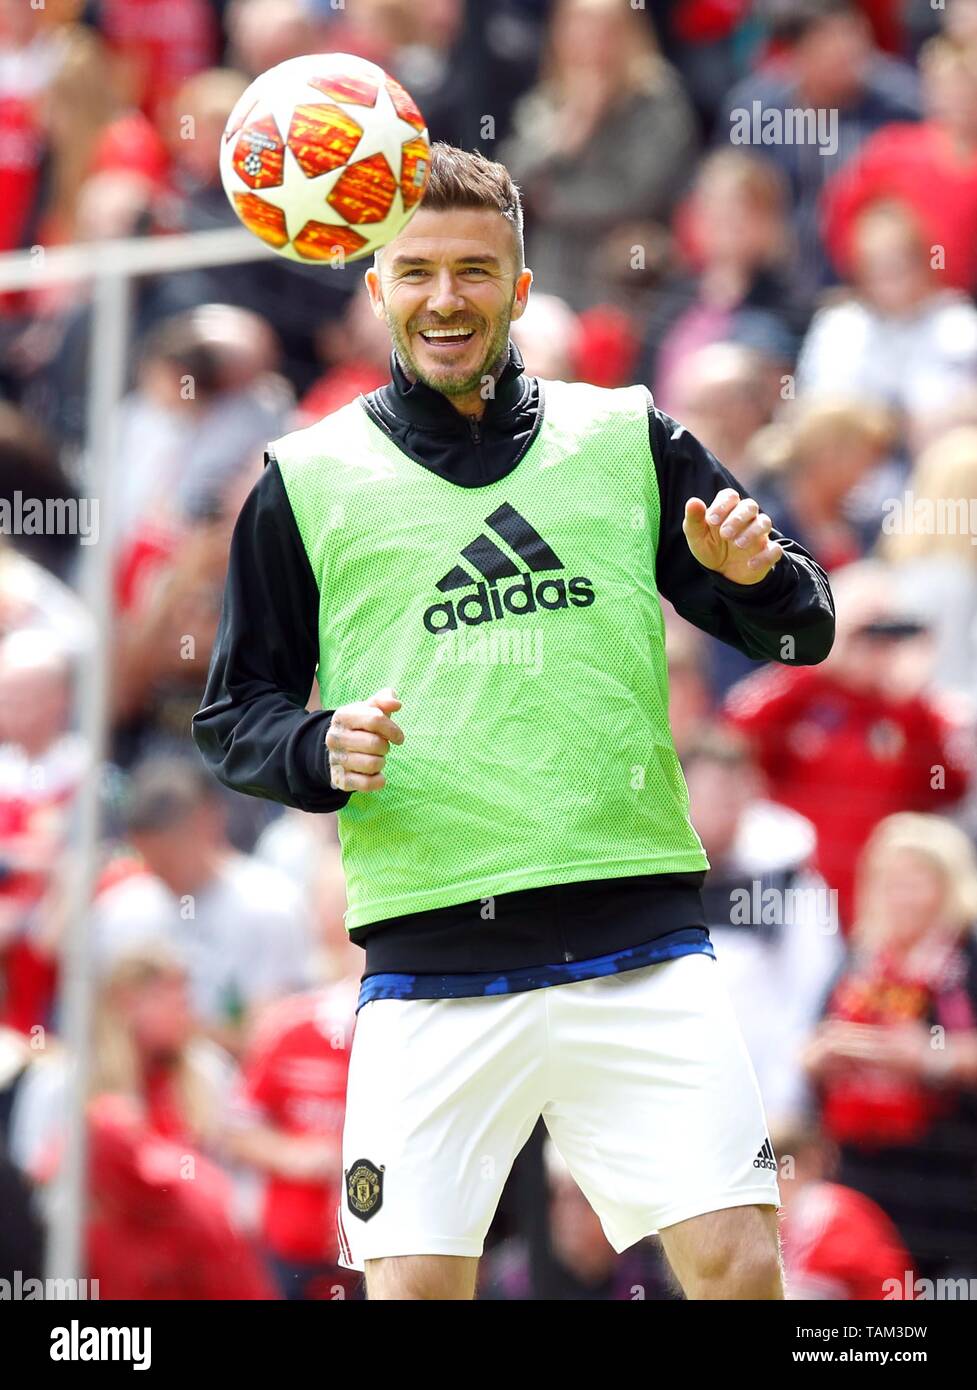 Manchester United Legends David Beckham warms up before the legends match at Old Trafford, Manchester. Stock Photo